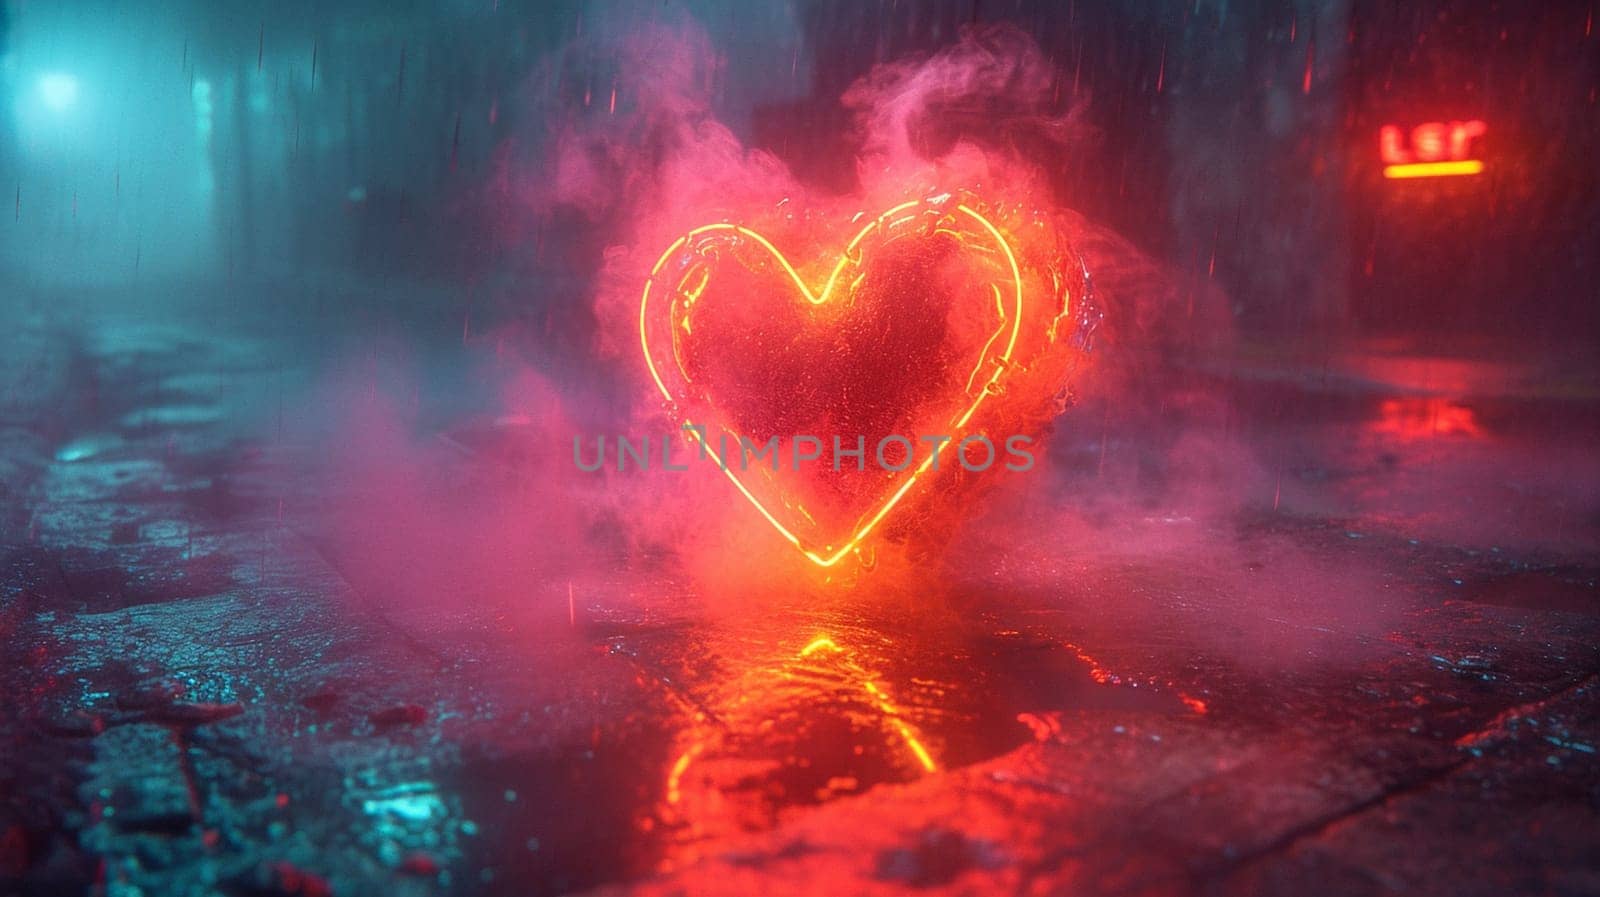 Beautiful neon 3d background with a heart. High quality illustration. The heart in the light of the mysterious red energy